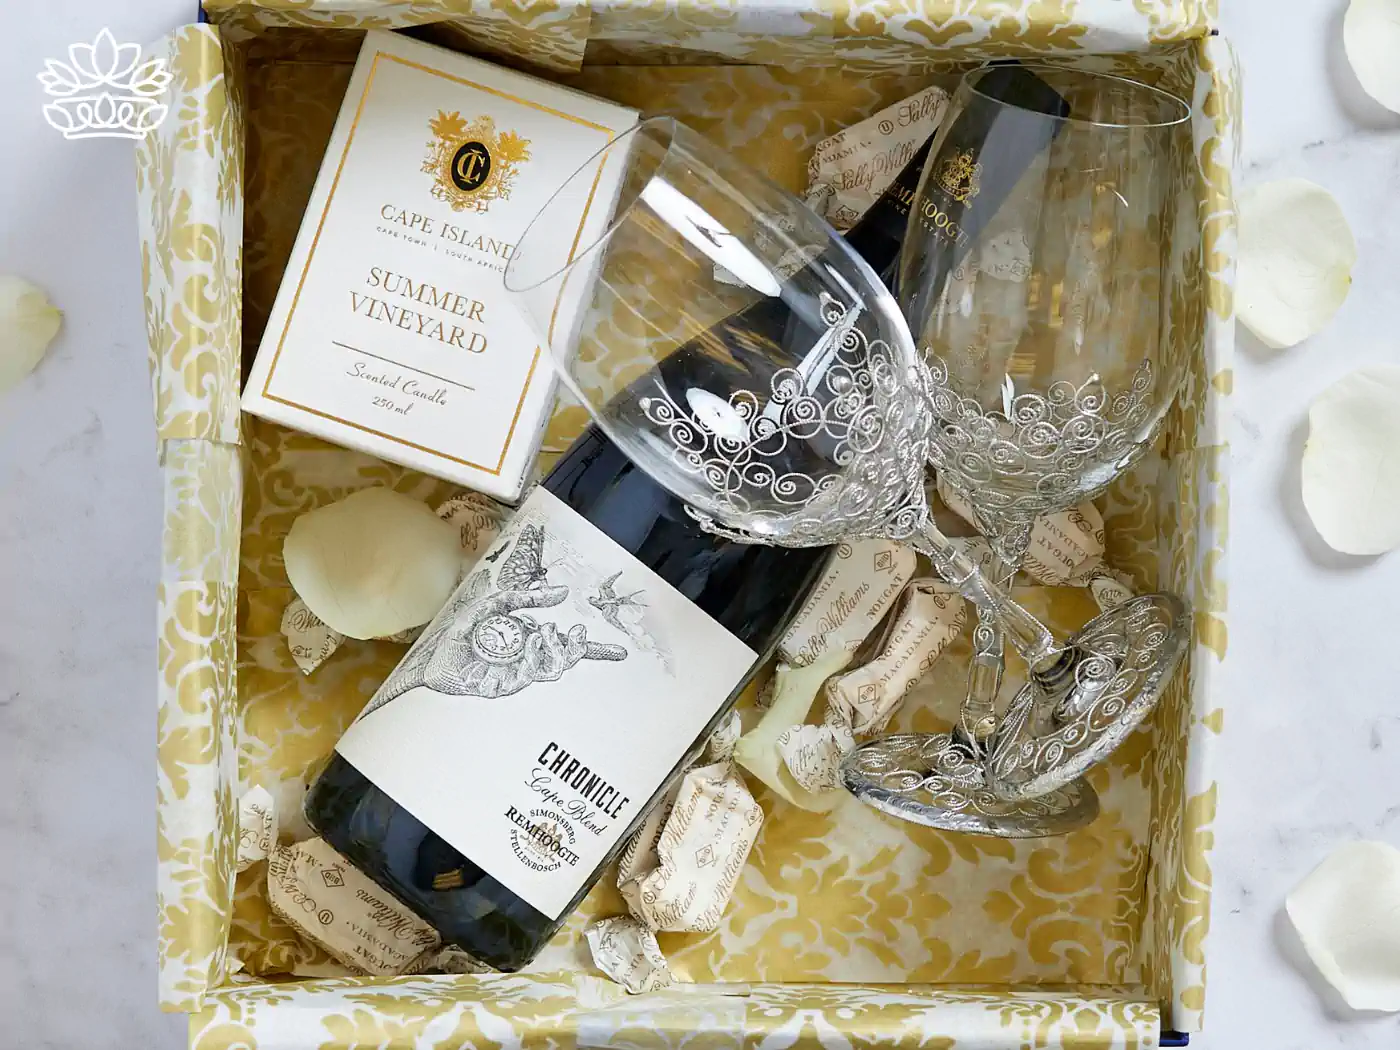 Luxurious housewarming gift box containing a bottle of Chronicle red wine, two elegantly patterned wine glasses, and a 'Summer Vineyard' scented candle, all nestled in a golden patterned box with rose petals. A sophisticated and thoughtful gift. Fabulous Flowers and Gifts.